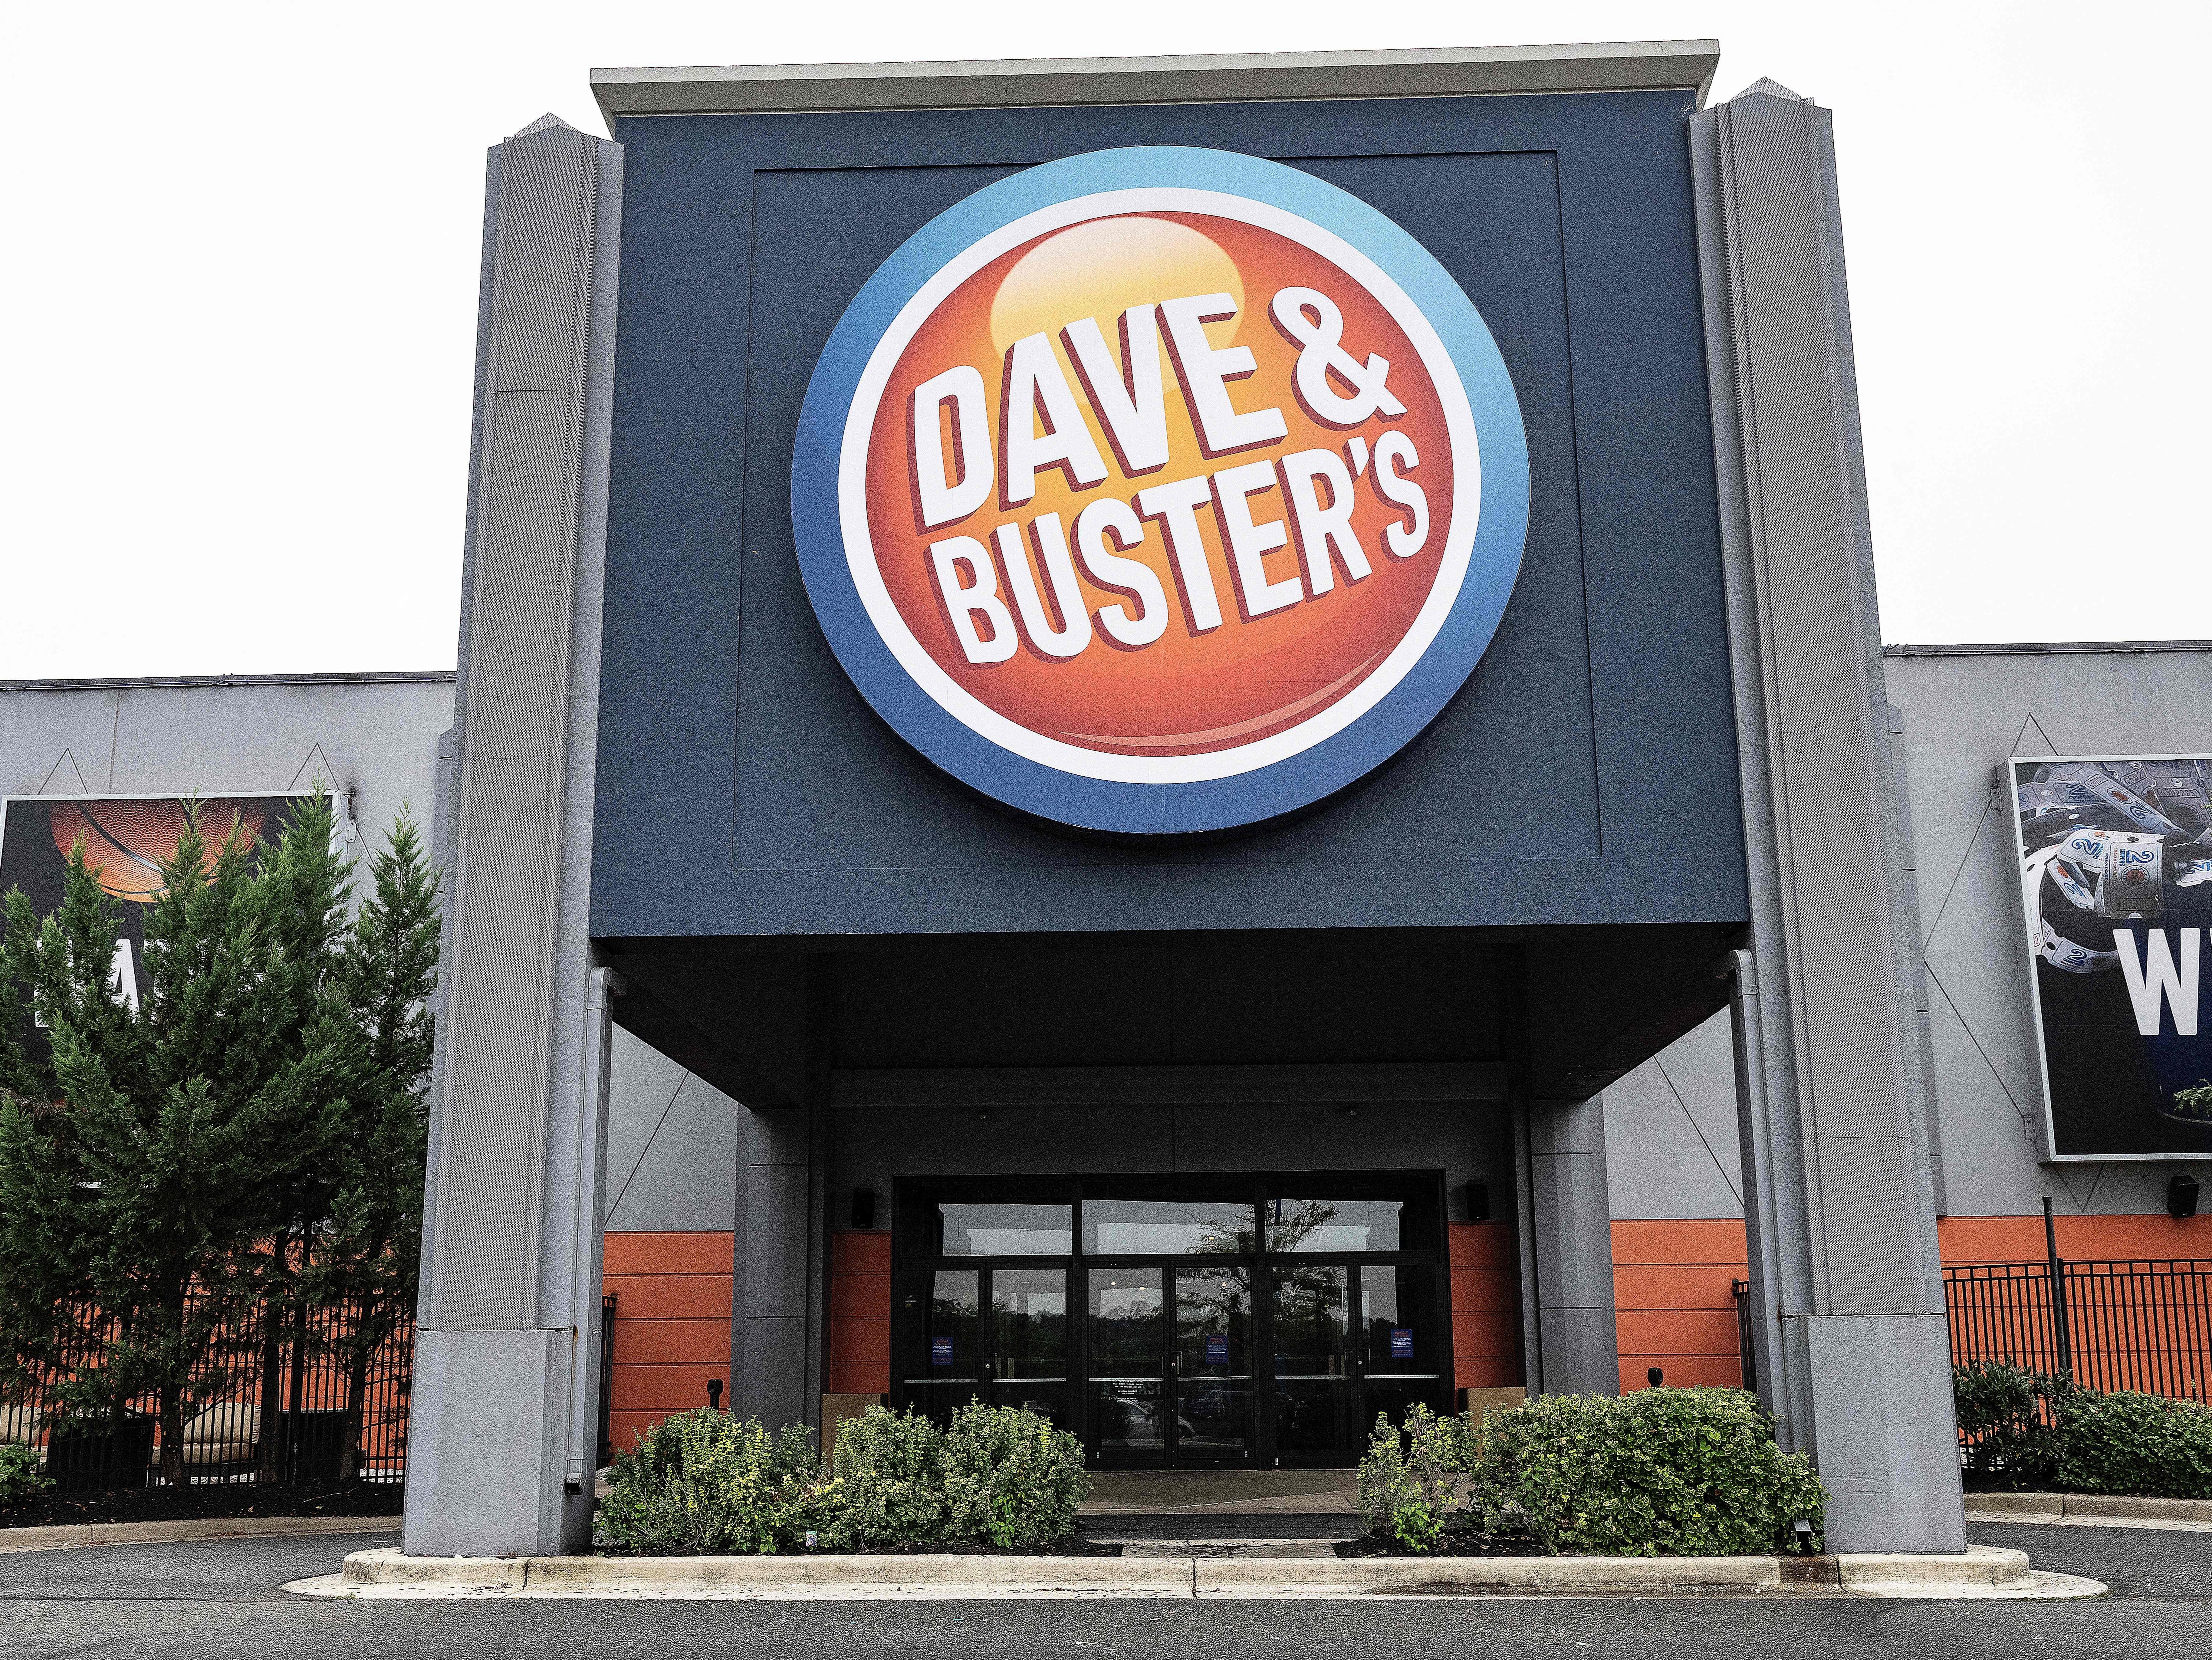 One of the cofounders of the entertainment chain, Dave & Buster’s, James ‘Buster’ Corley has died